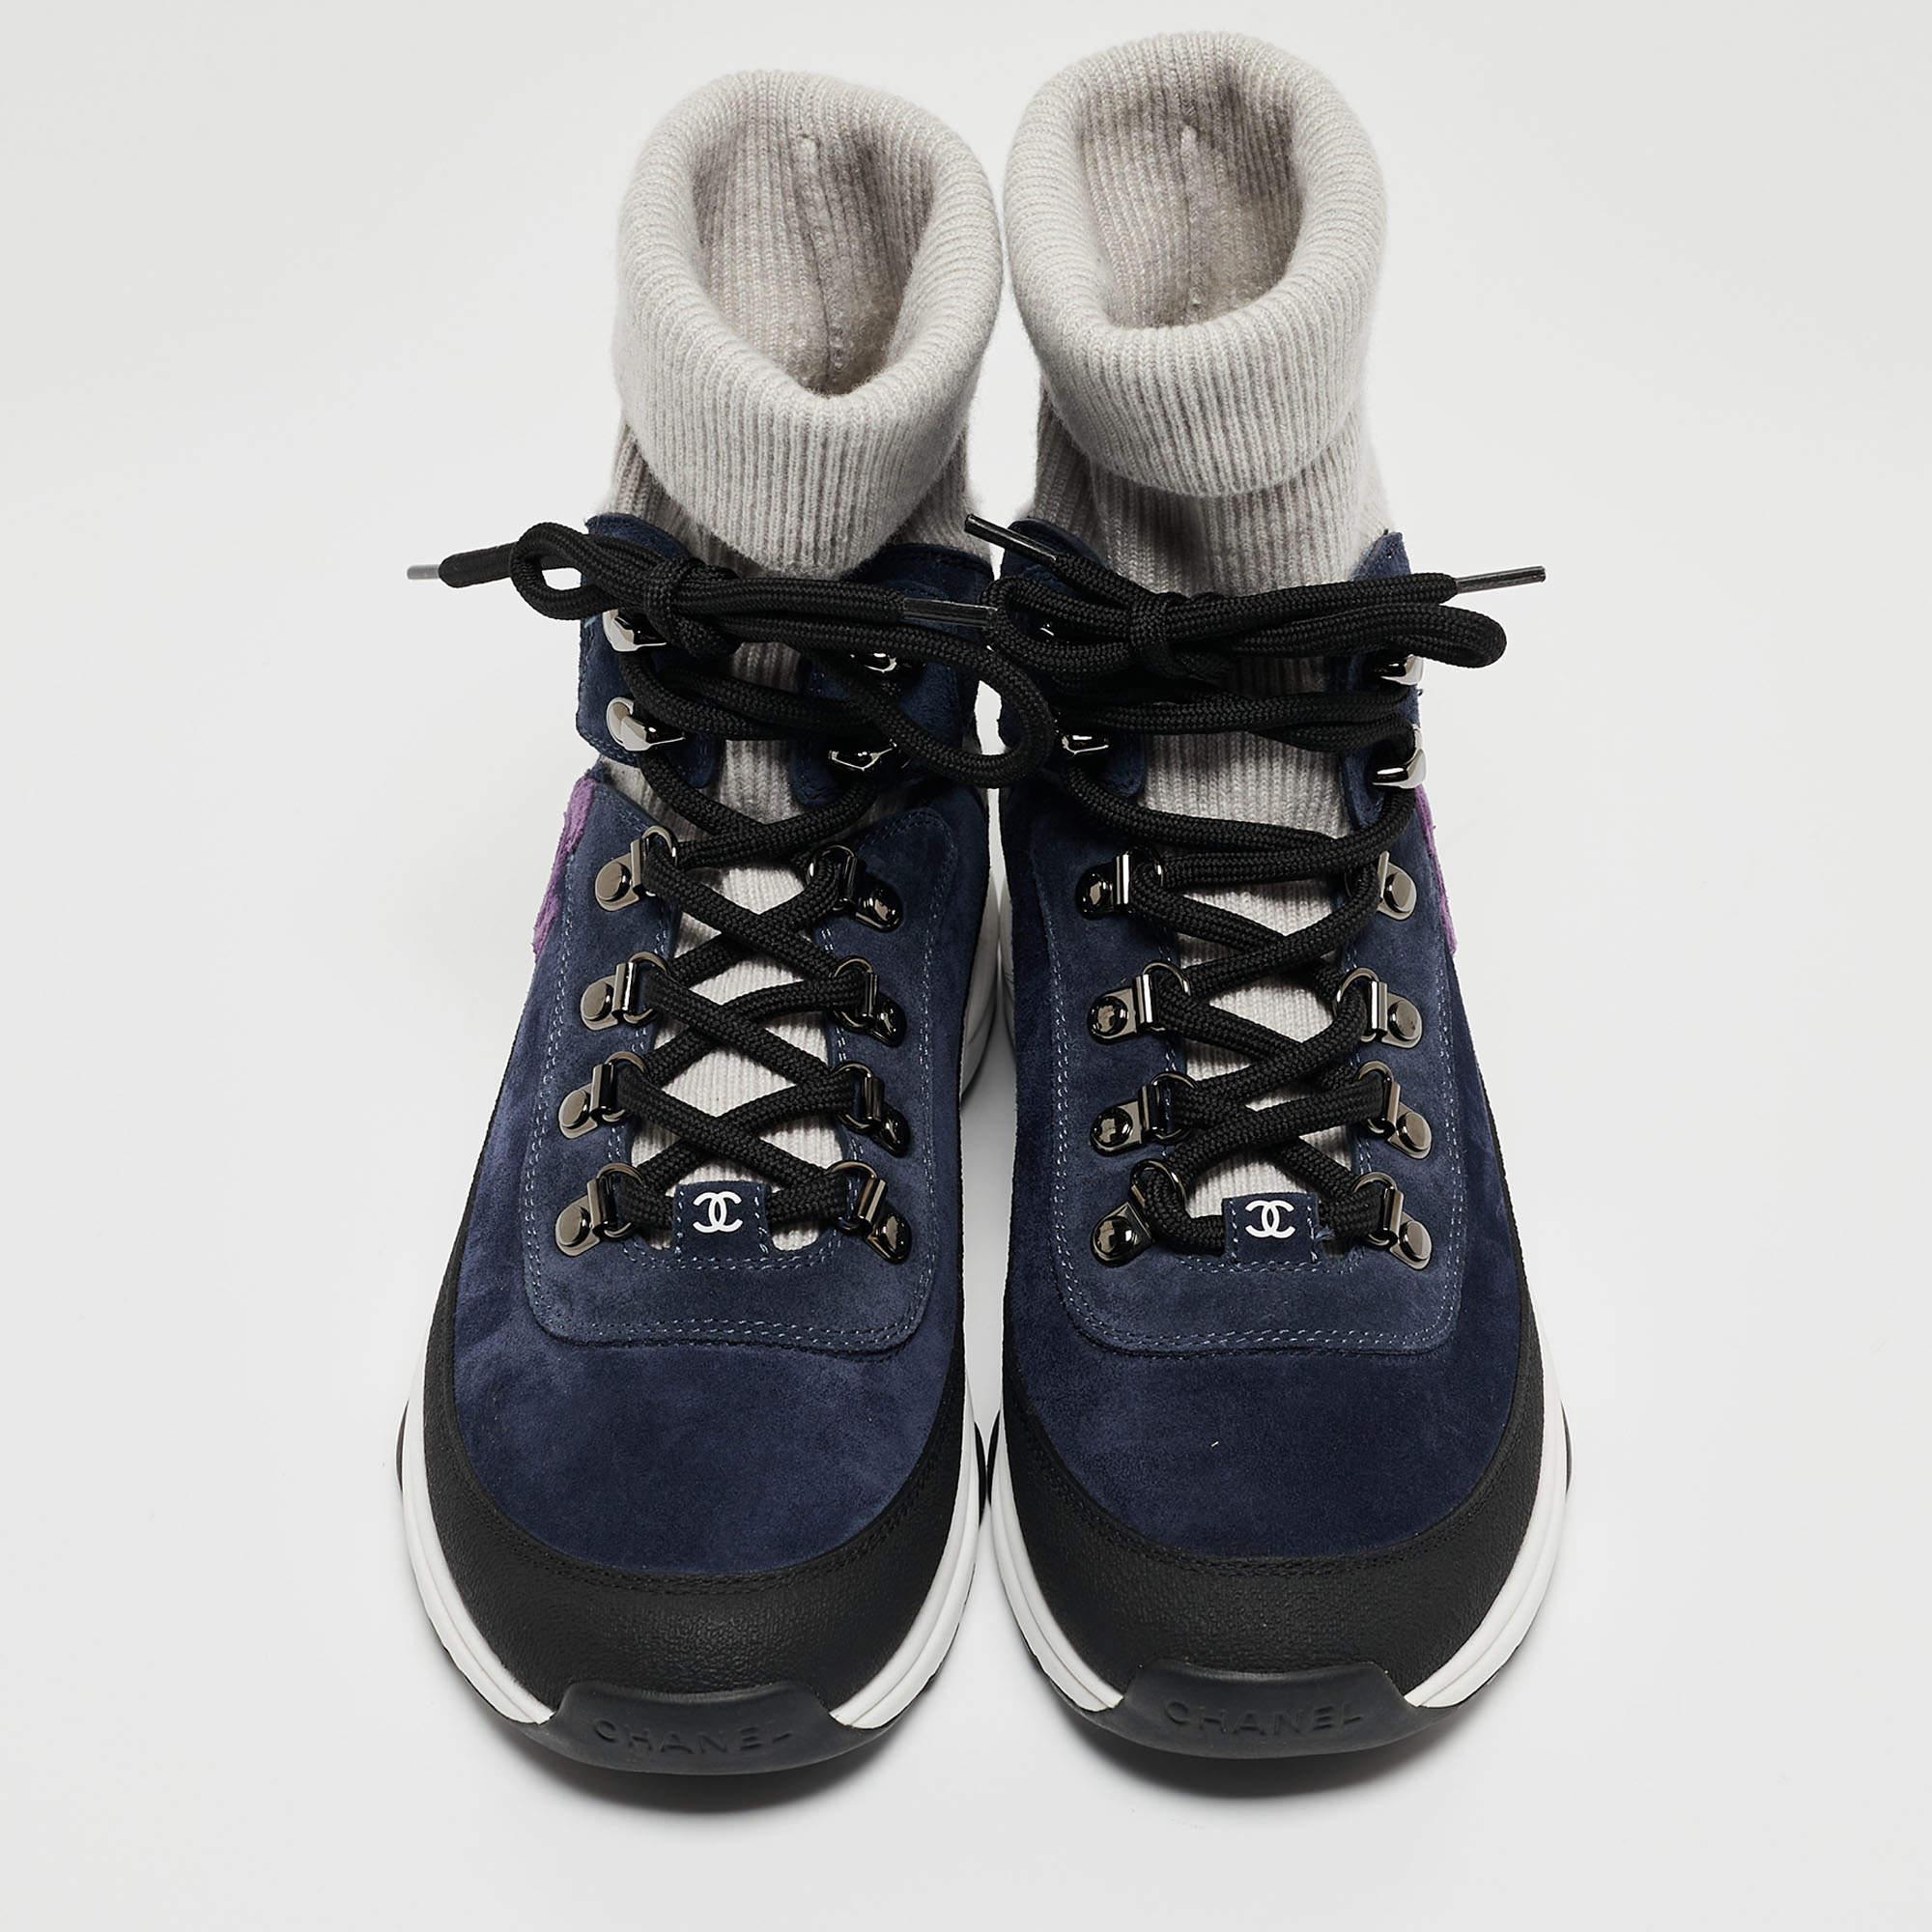 Chanel Navy Blue Suede and Leather Interlocking CC Logo Sock Sneakers Size 38 For Sale 1